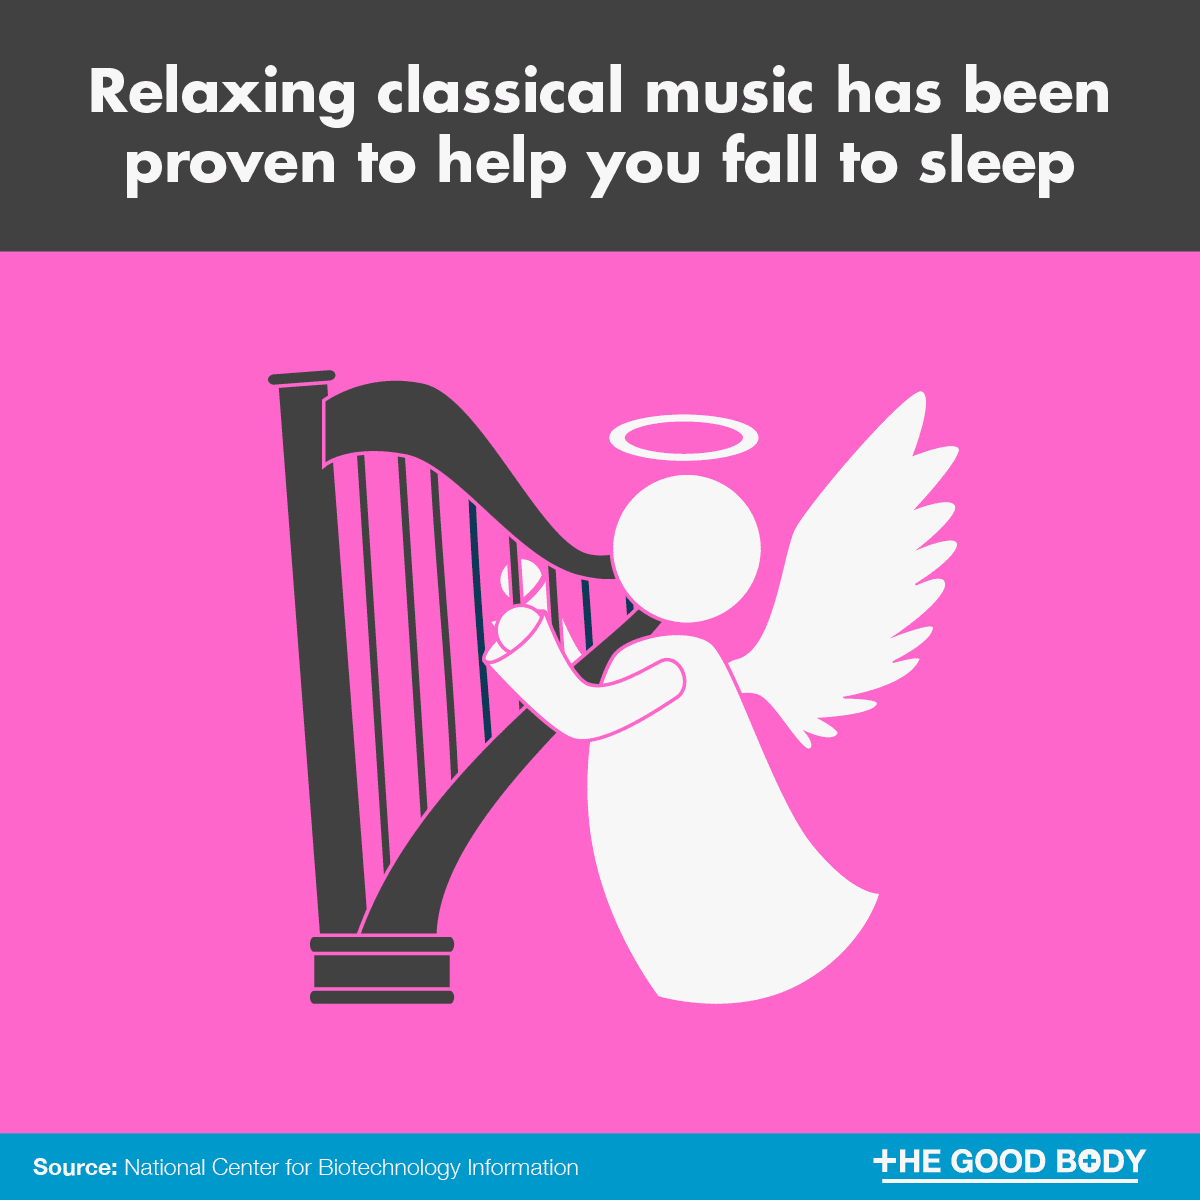 Infographic: Relaxing classical music has been proven to help you fall to sleep